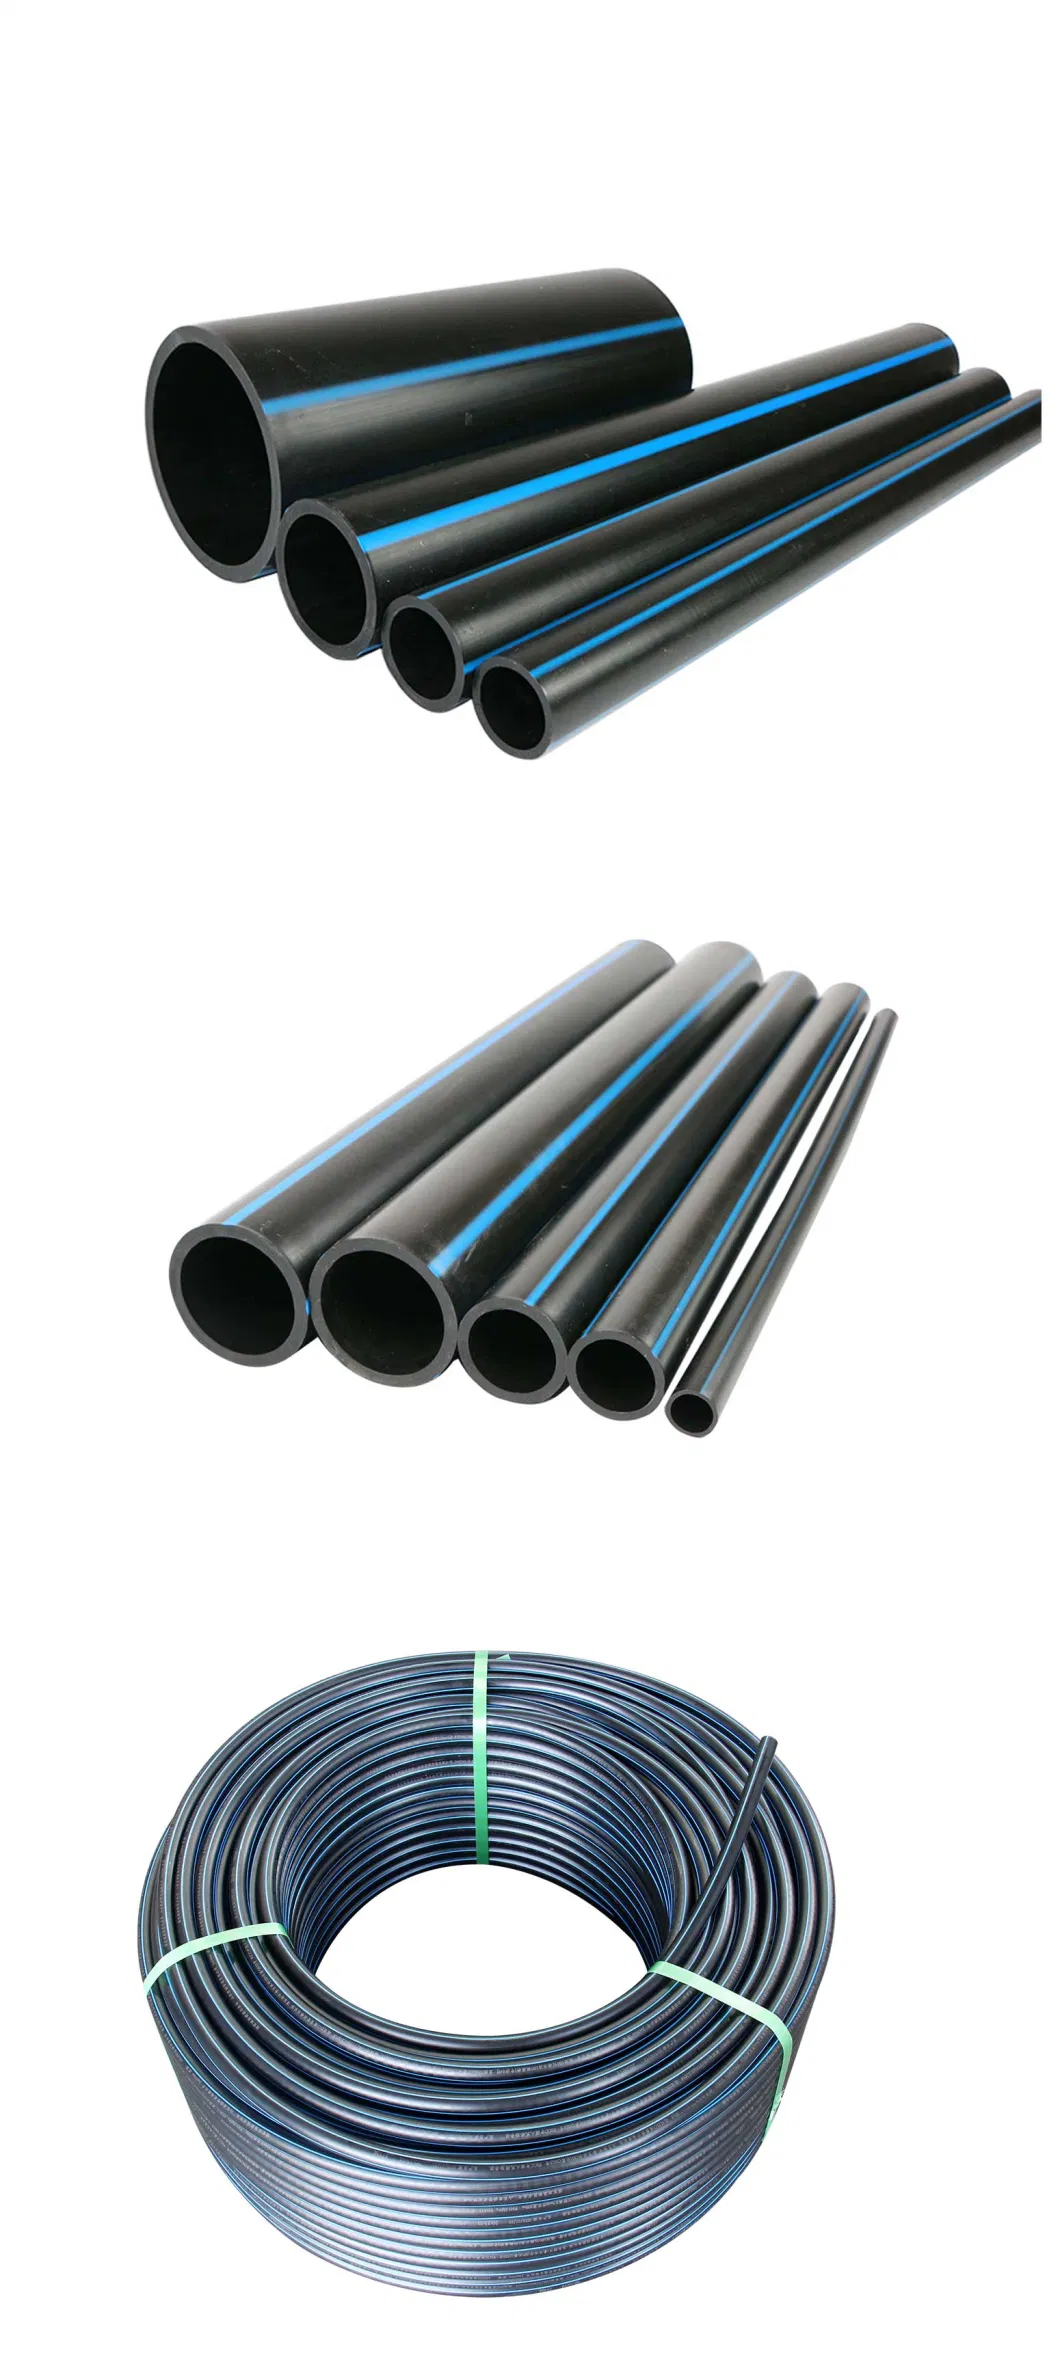 HDPE Pipe DN315mm SDR26 Pn0.6MPa for Water Supply/Agricultural Irrigation